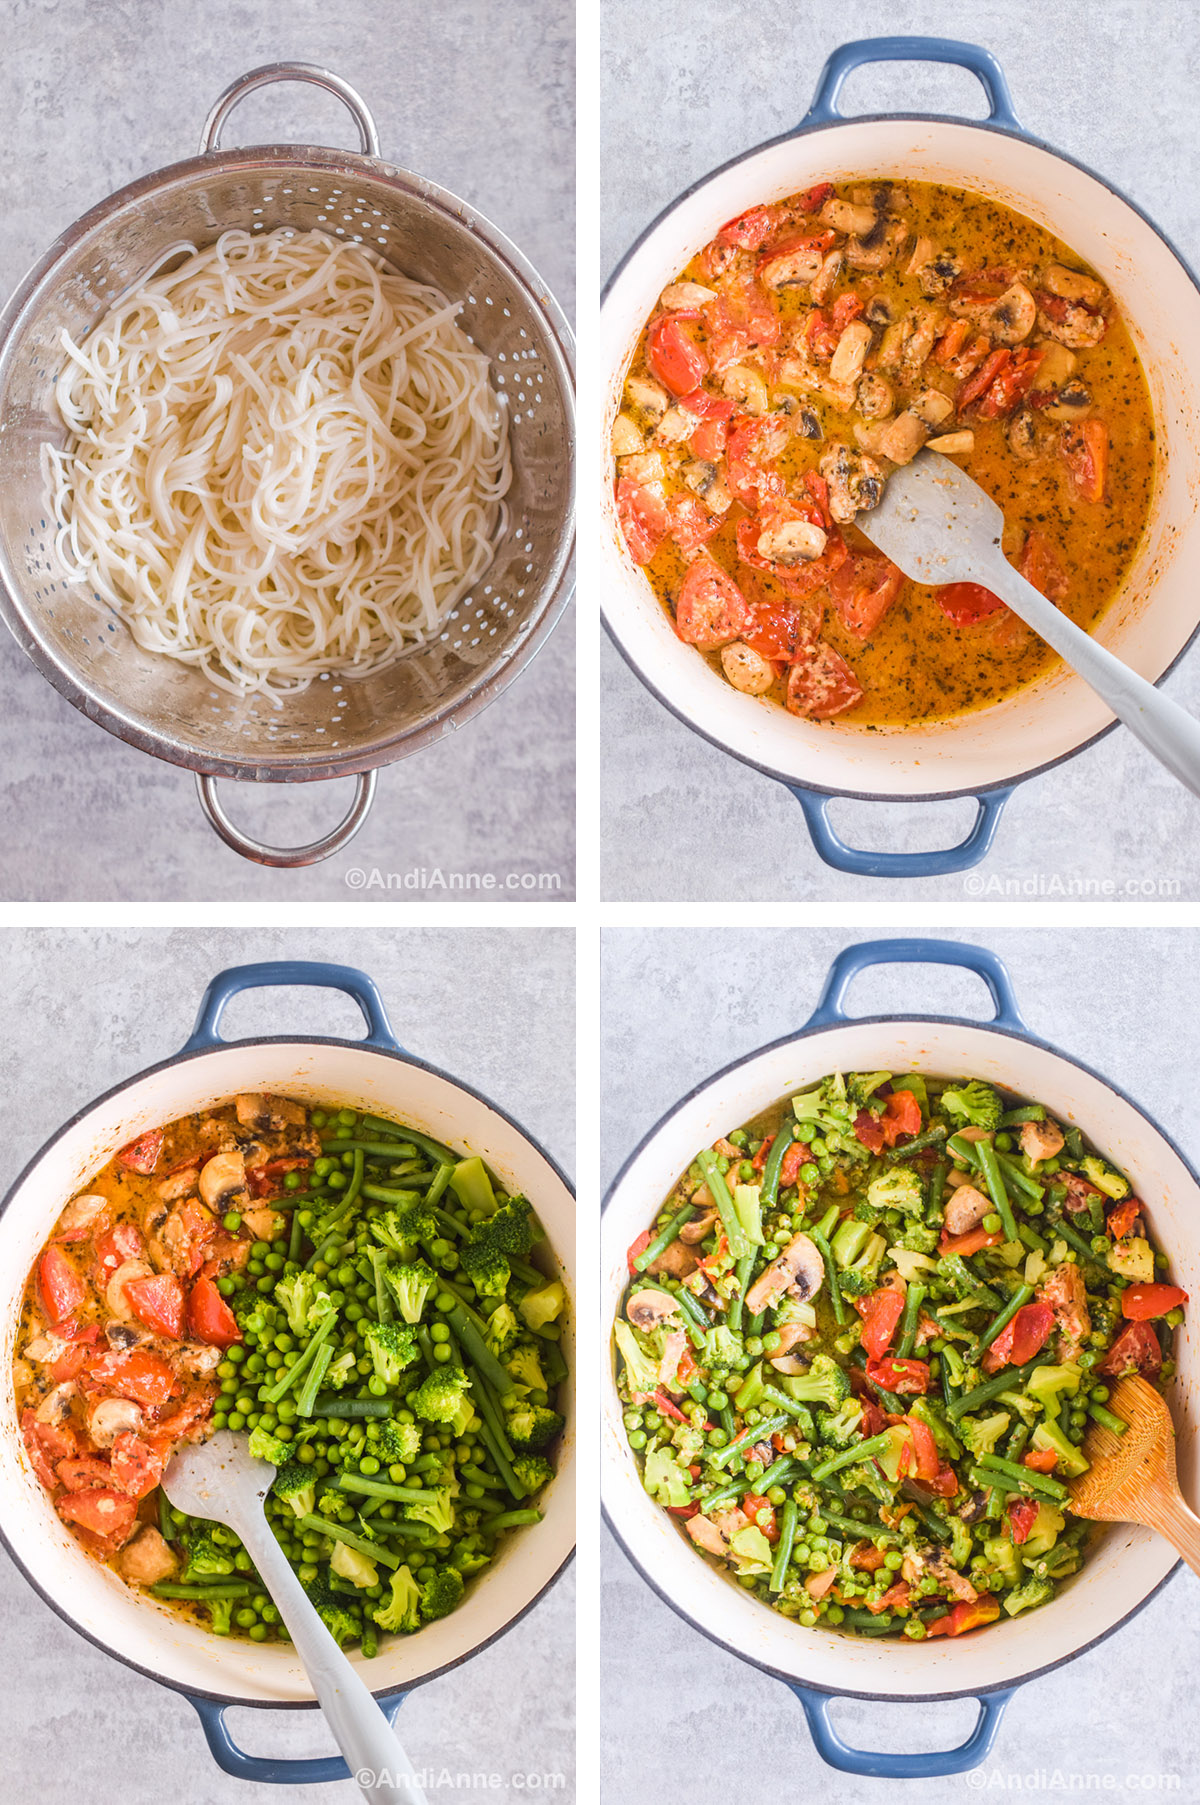 Four images showing steps to make recipe including a metal strainer with cooked spaghetti noodles, cooked mushrooms and tomatoes in sauce in a dutch oven, A pot divided in half with green vegetables and the cooke tomato mushrooms in sauce. And a pot with a green vegetables, tomatoes and mushrooms all mixed together.